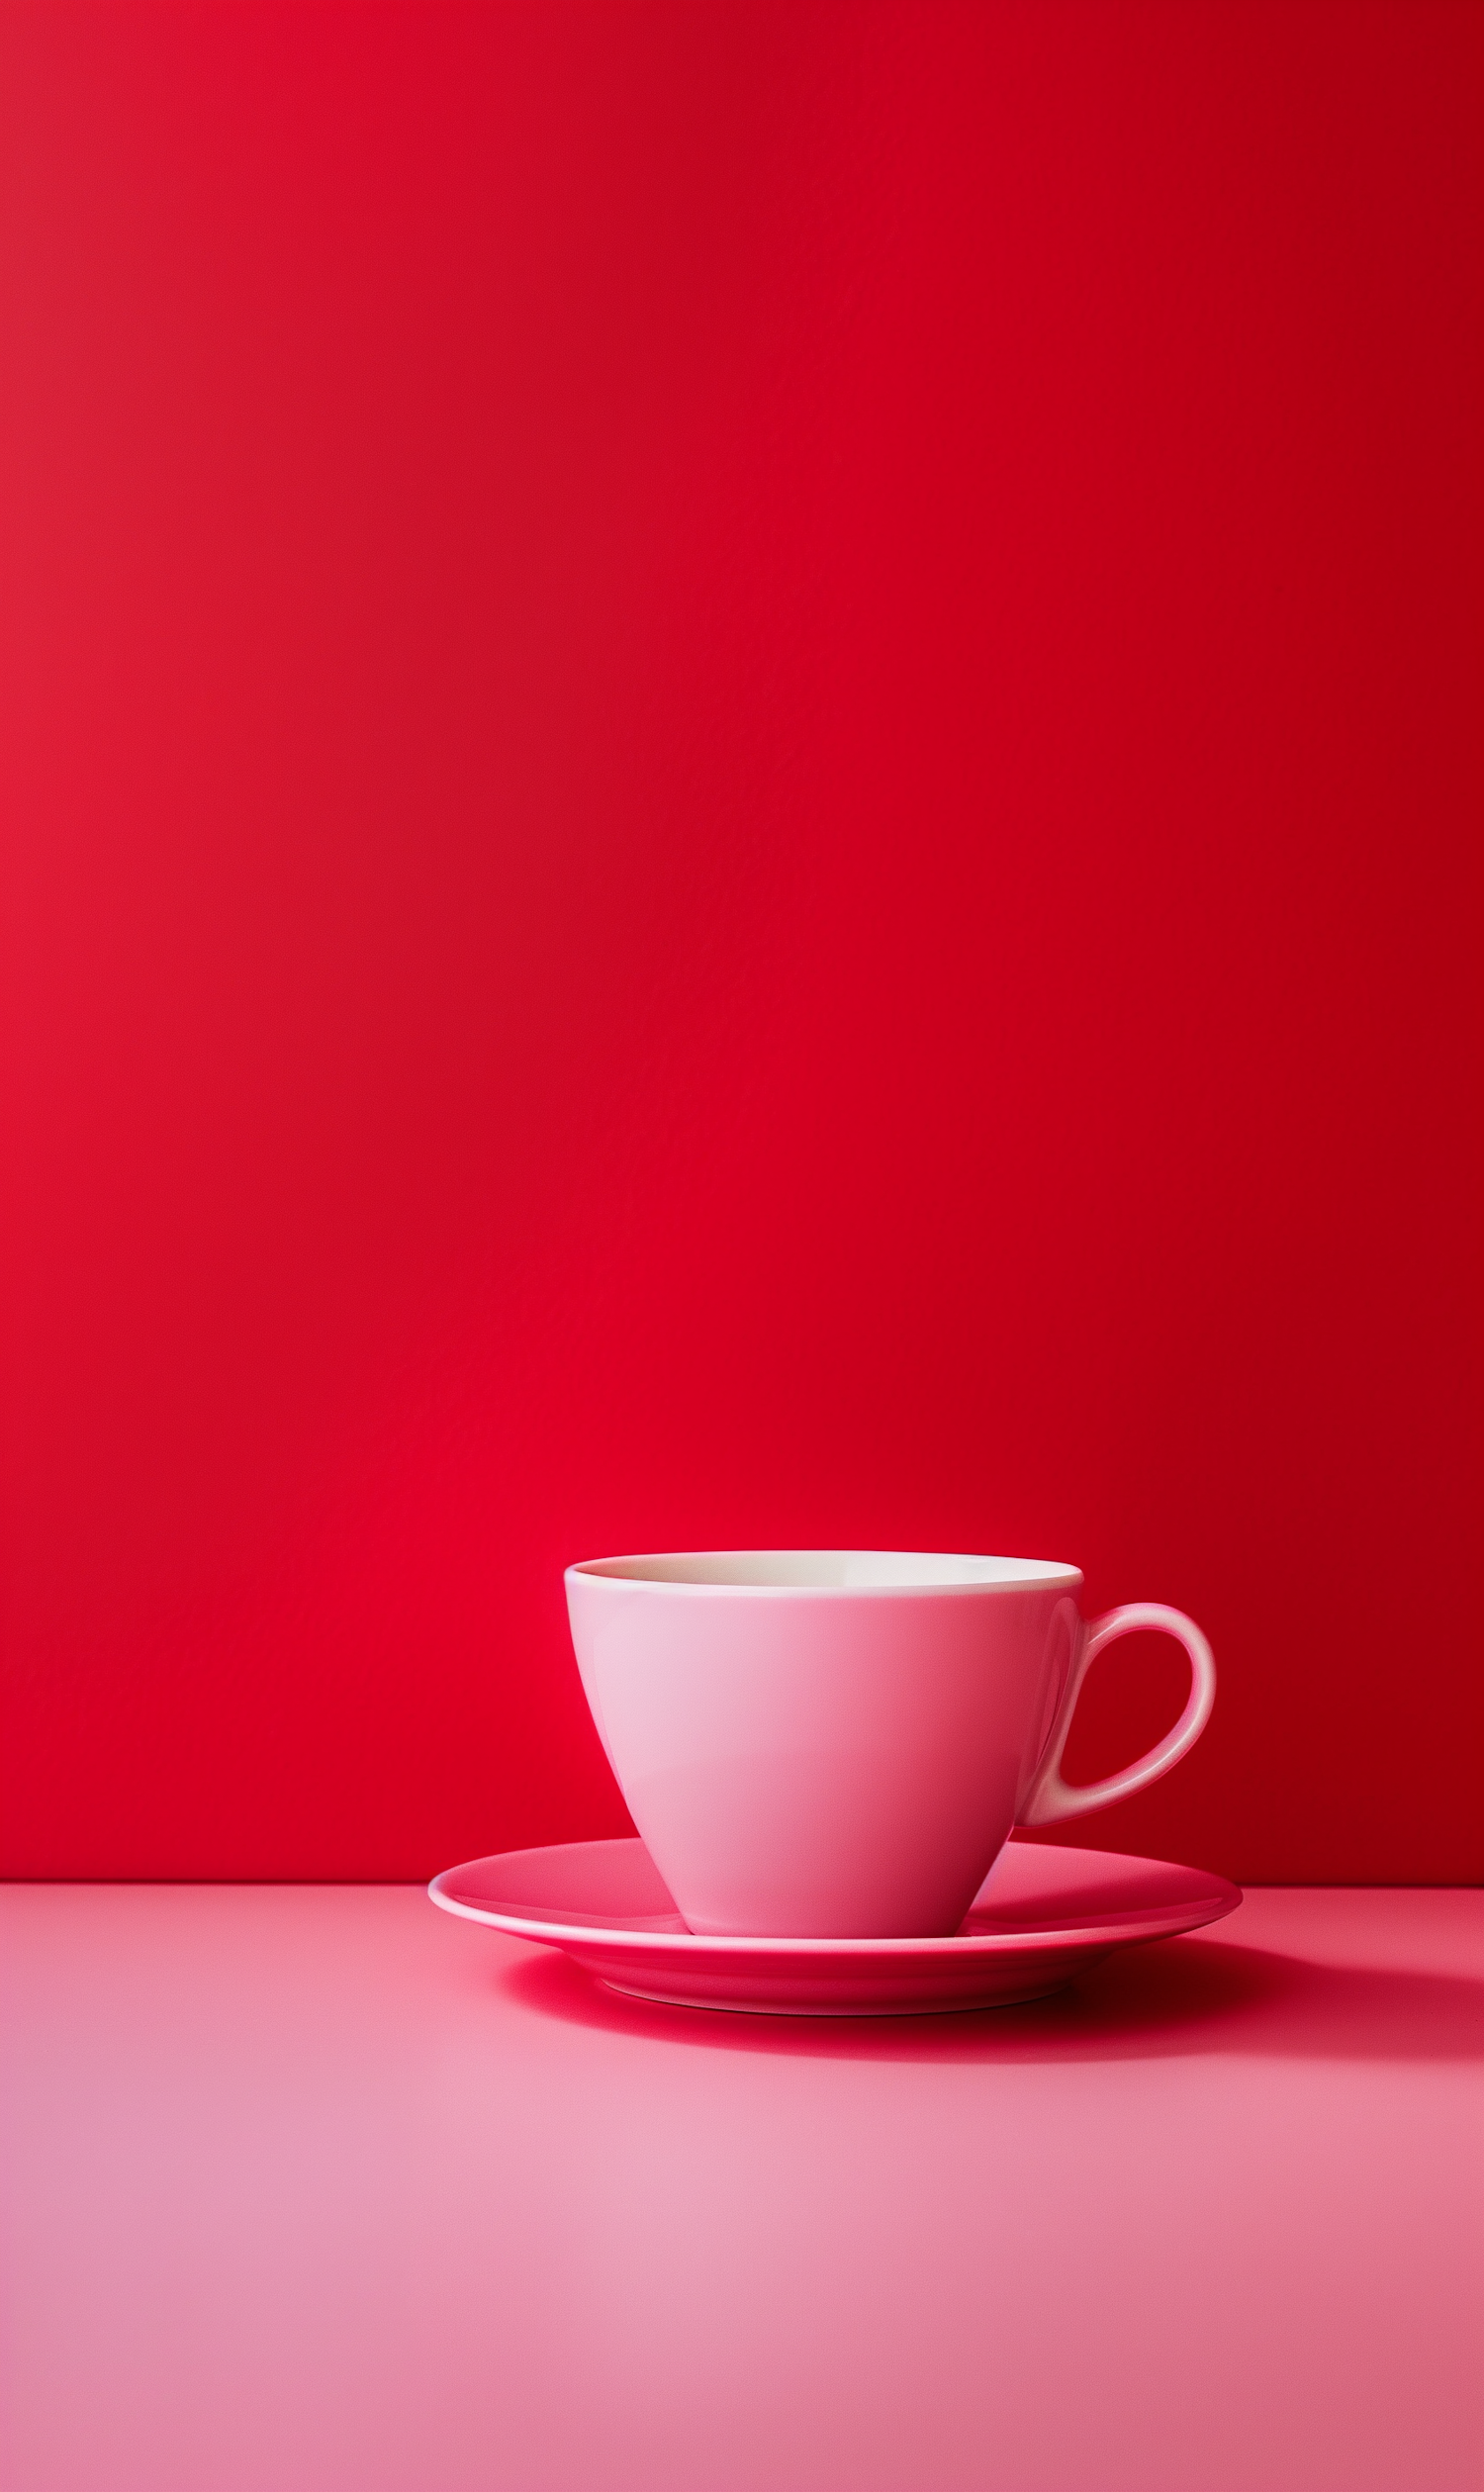 Pink Teacup on Red Background